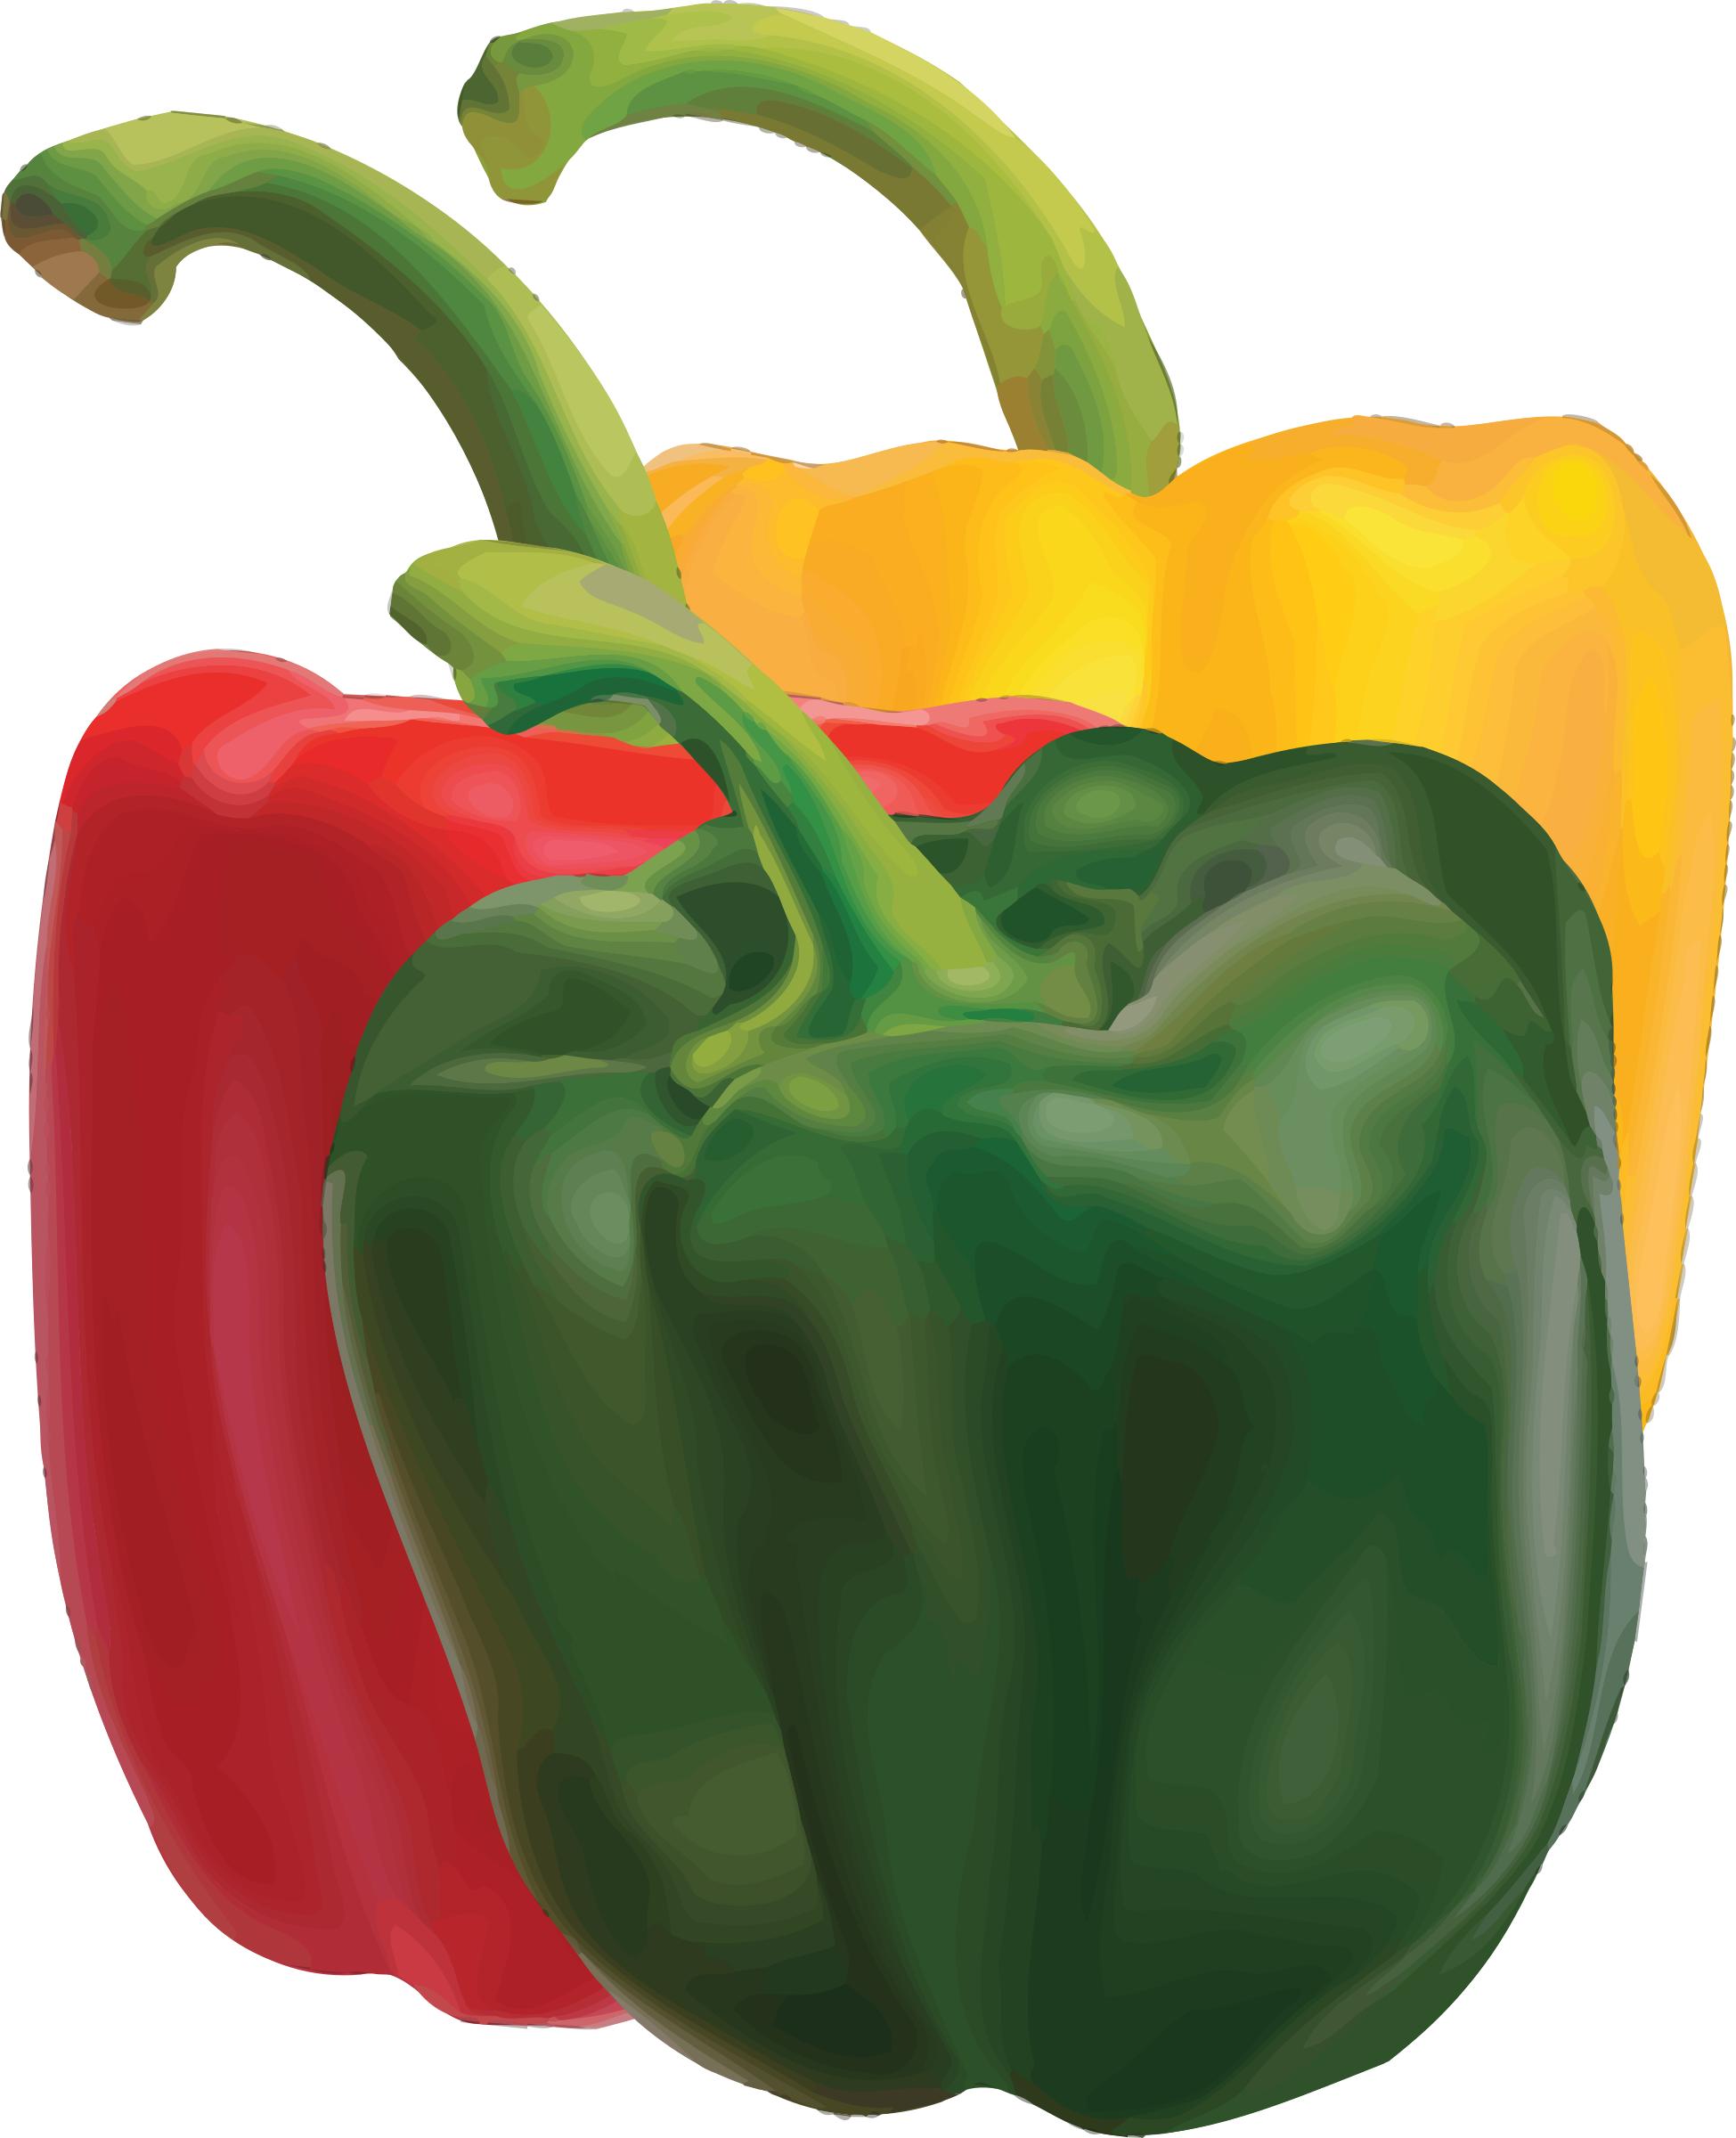 Peppers 2 png